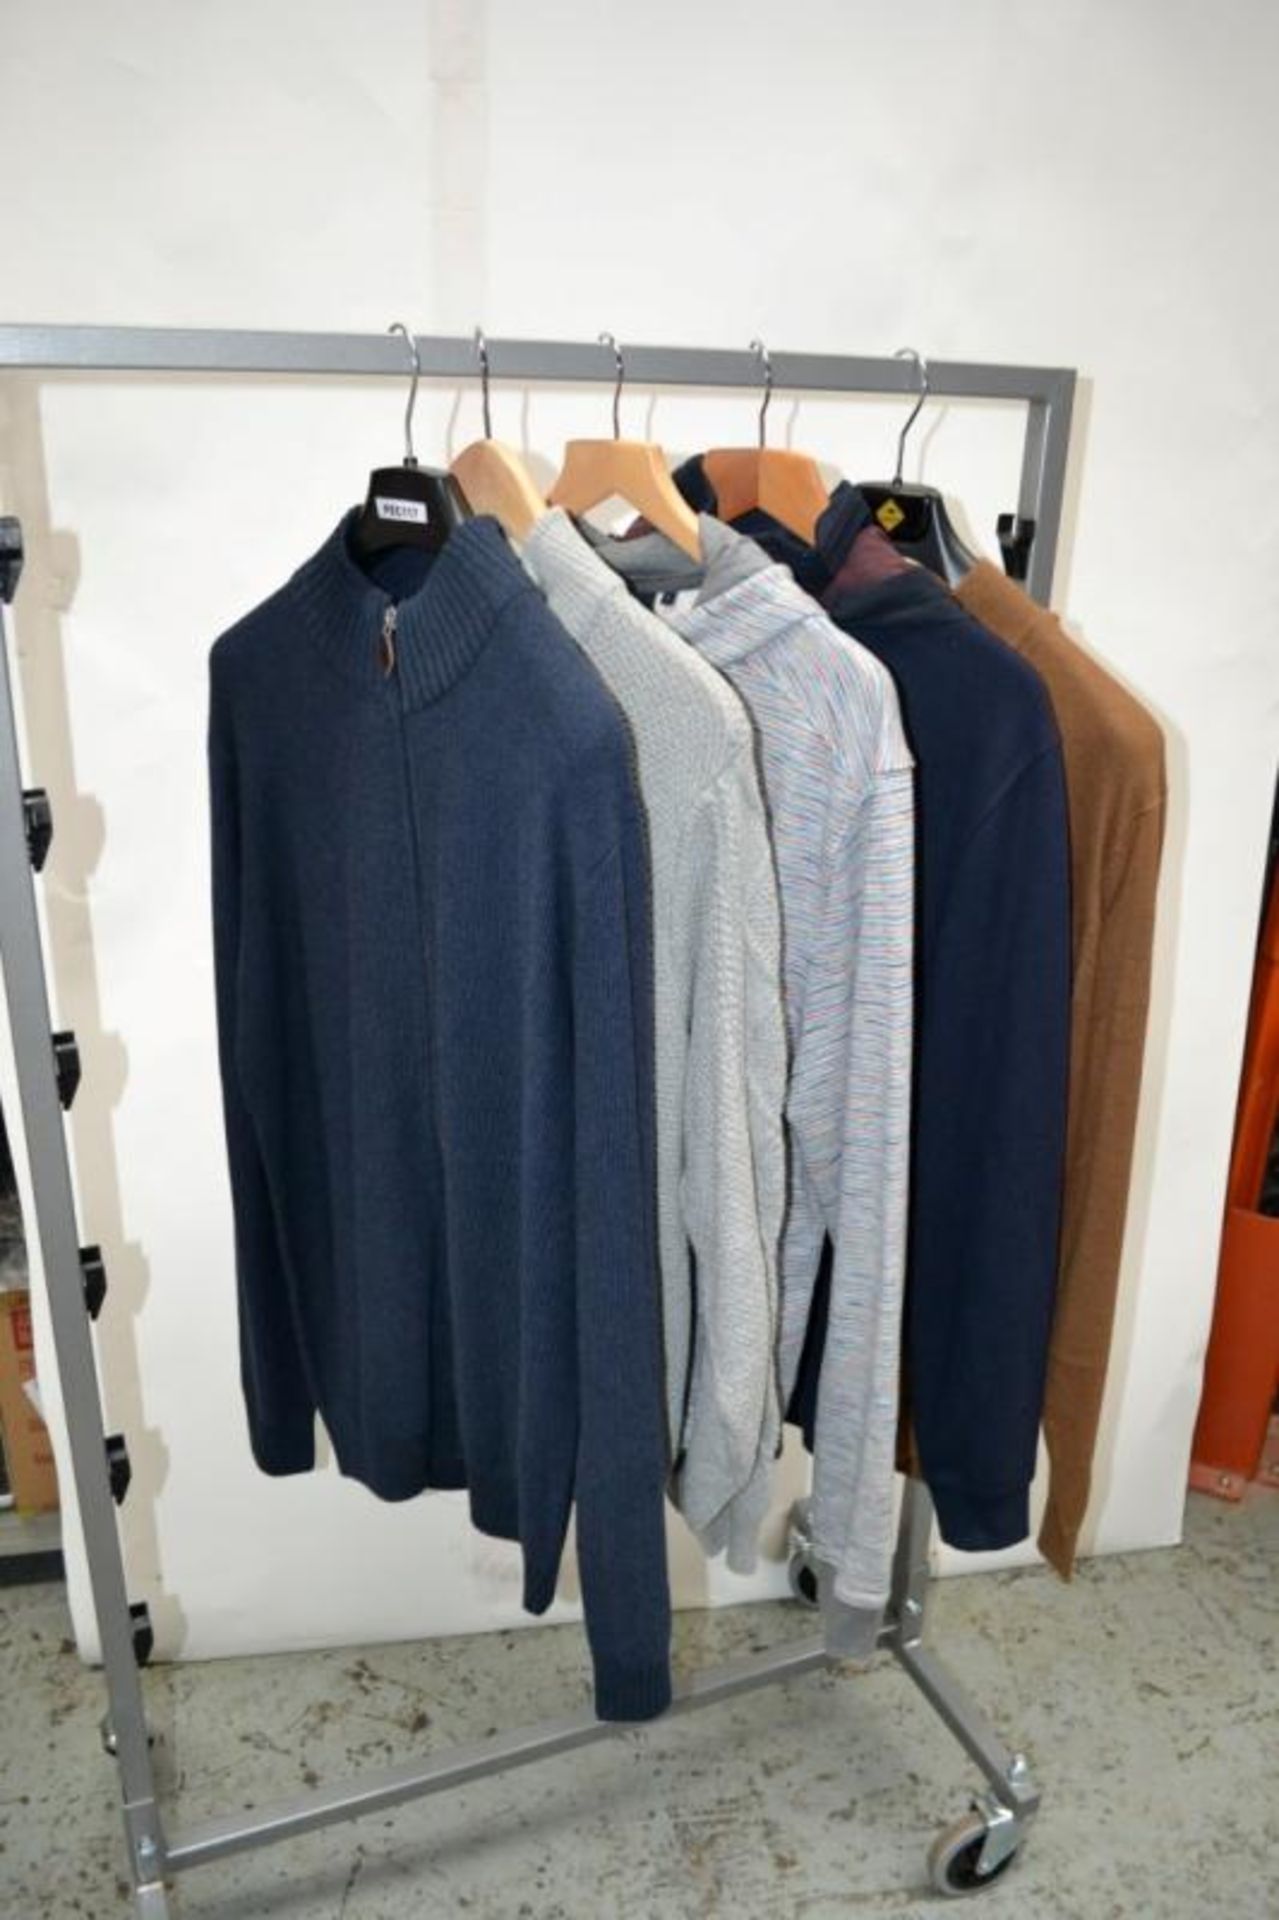 5 x Assorted Branded Long Sleeve Tops / Sweaters - Brands Include PRE END / DUCK & COVER / BRITISH